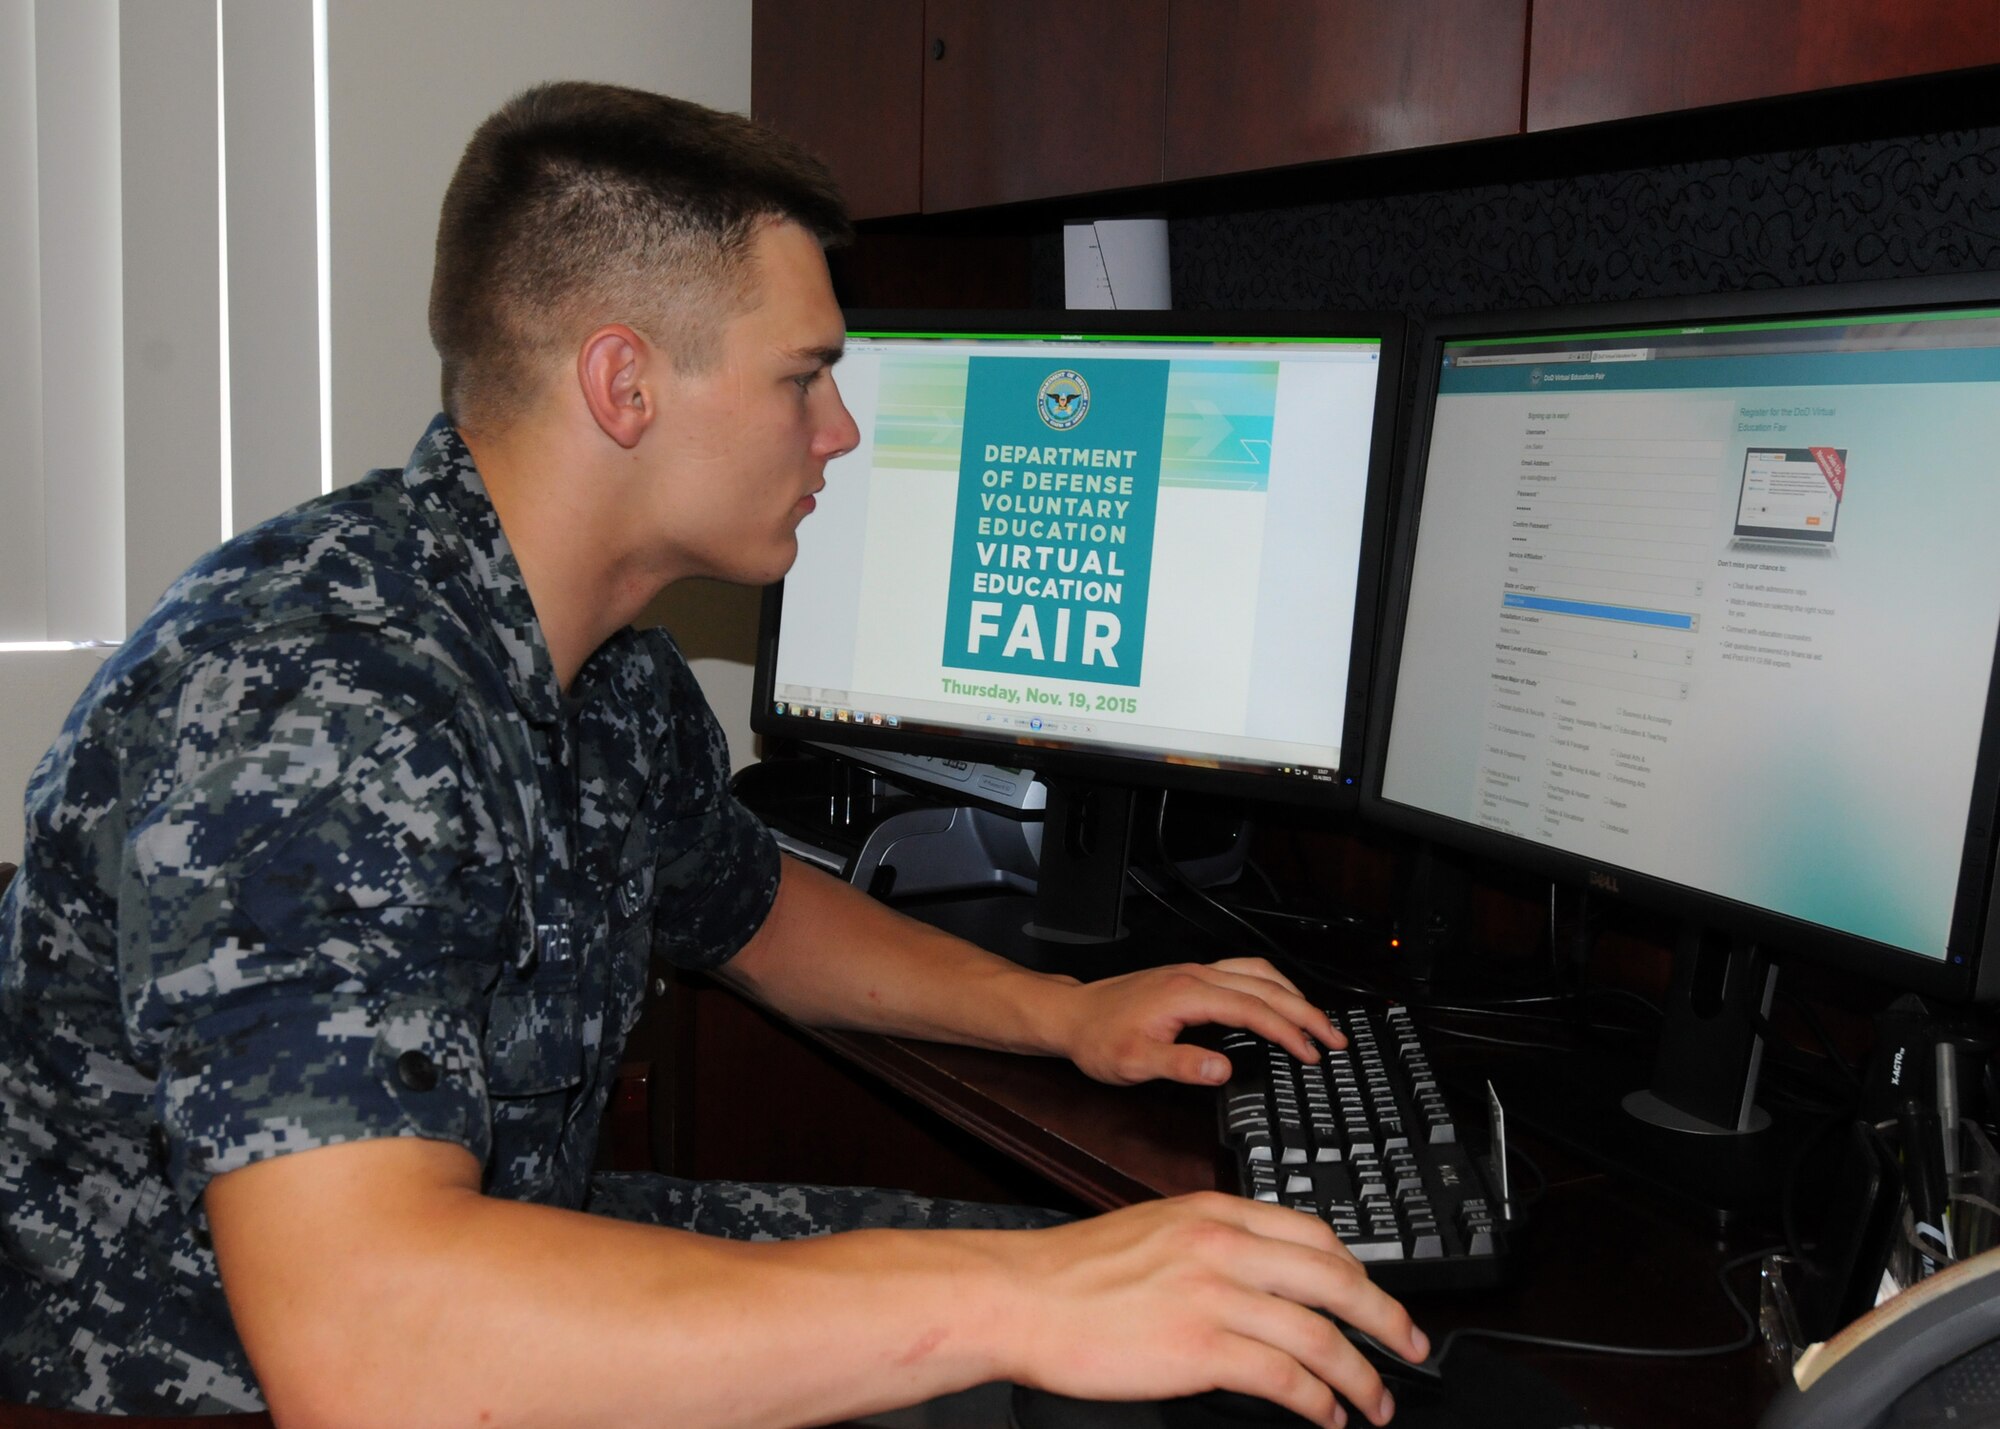 Information Systems Technician Seaman Austin Tresner explores how to register online for the DOD Virtual Education Fair, scheduled for Nov. 19. The fair offers service members the opportunity to chat live with more than 40 college admission representatives and to connect with education counselors. The virtual education fair is in support of all of the services' voluntary education programs. (U.S. Navy photo/Carla M. McCarthy)